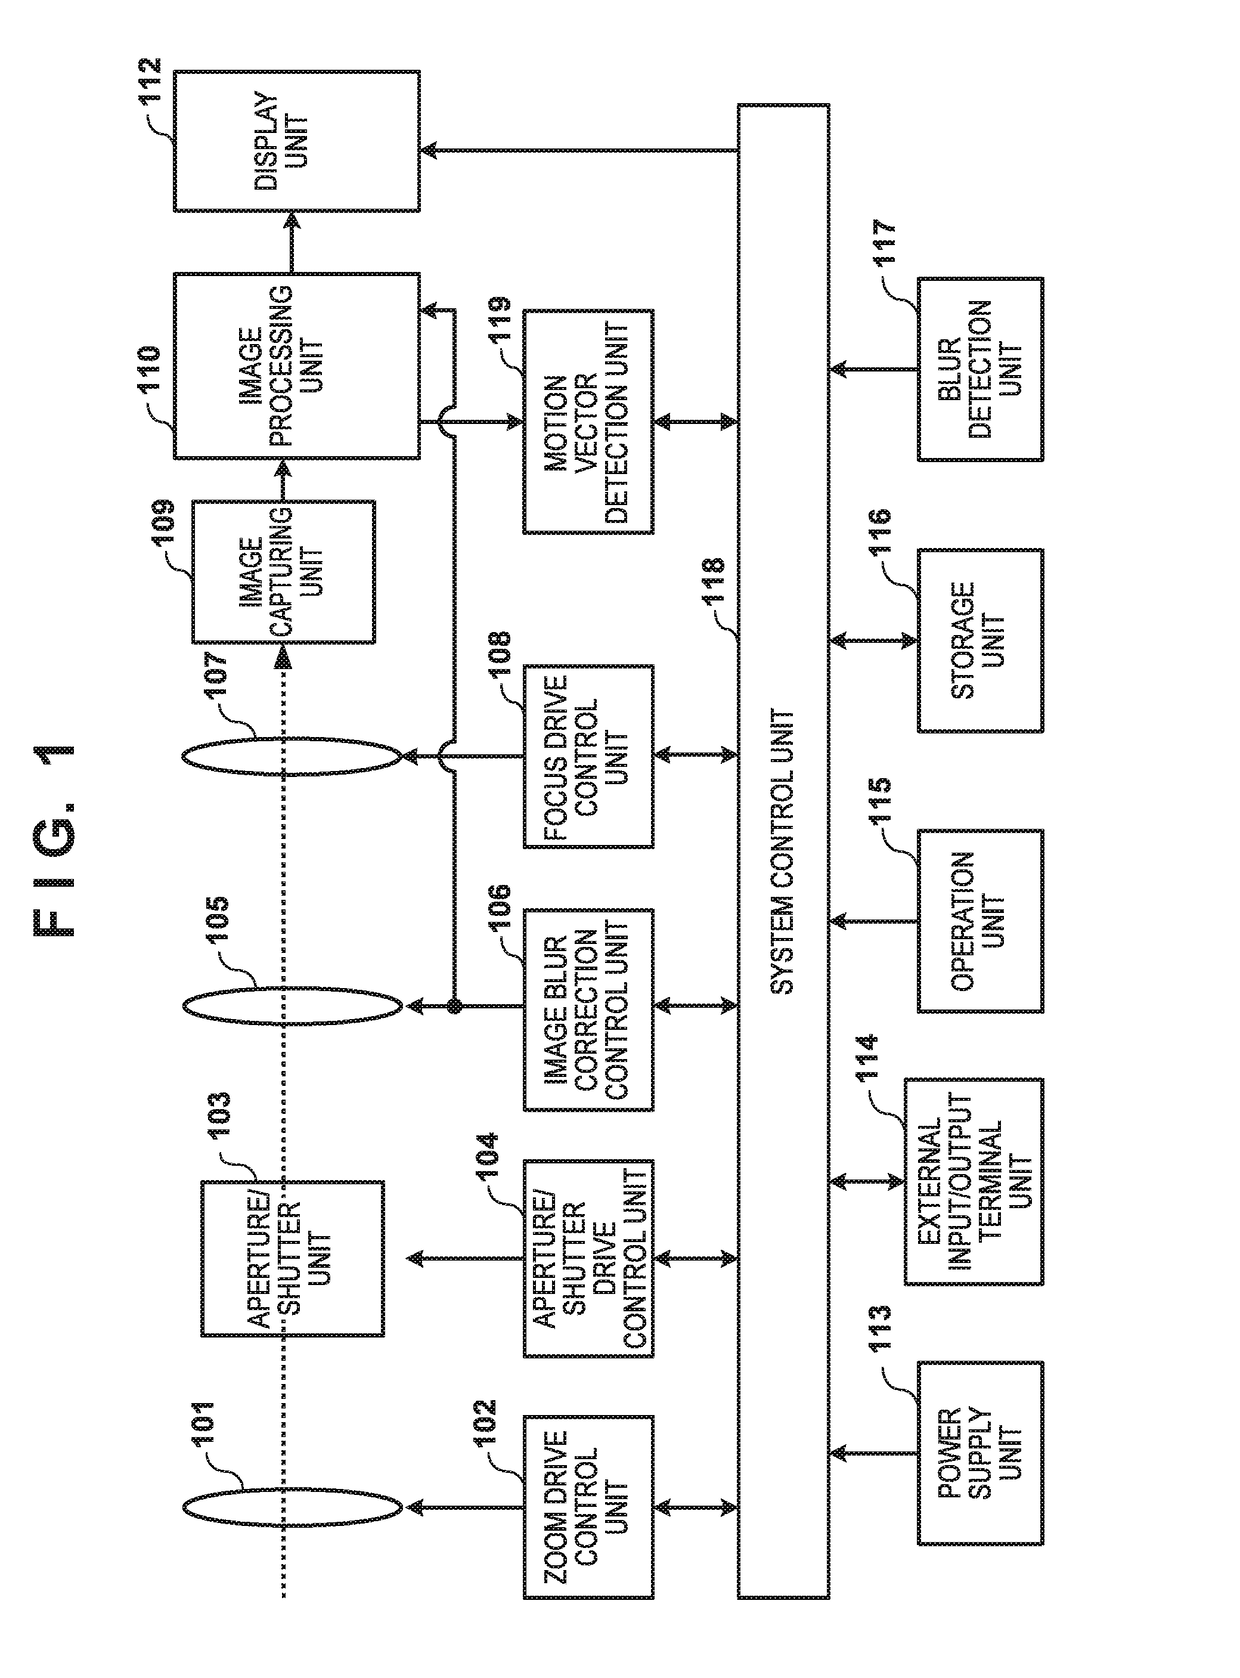 Motion vector detection device, method for controlling the same, and image capturing apparatus